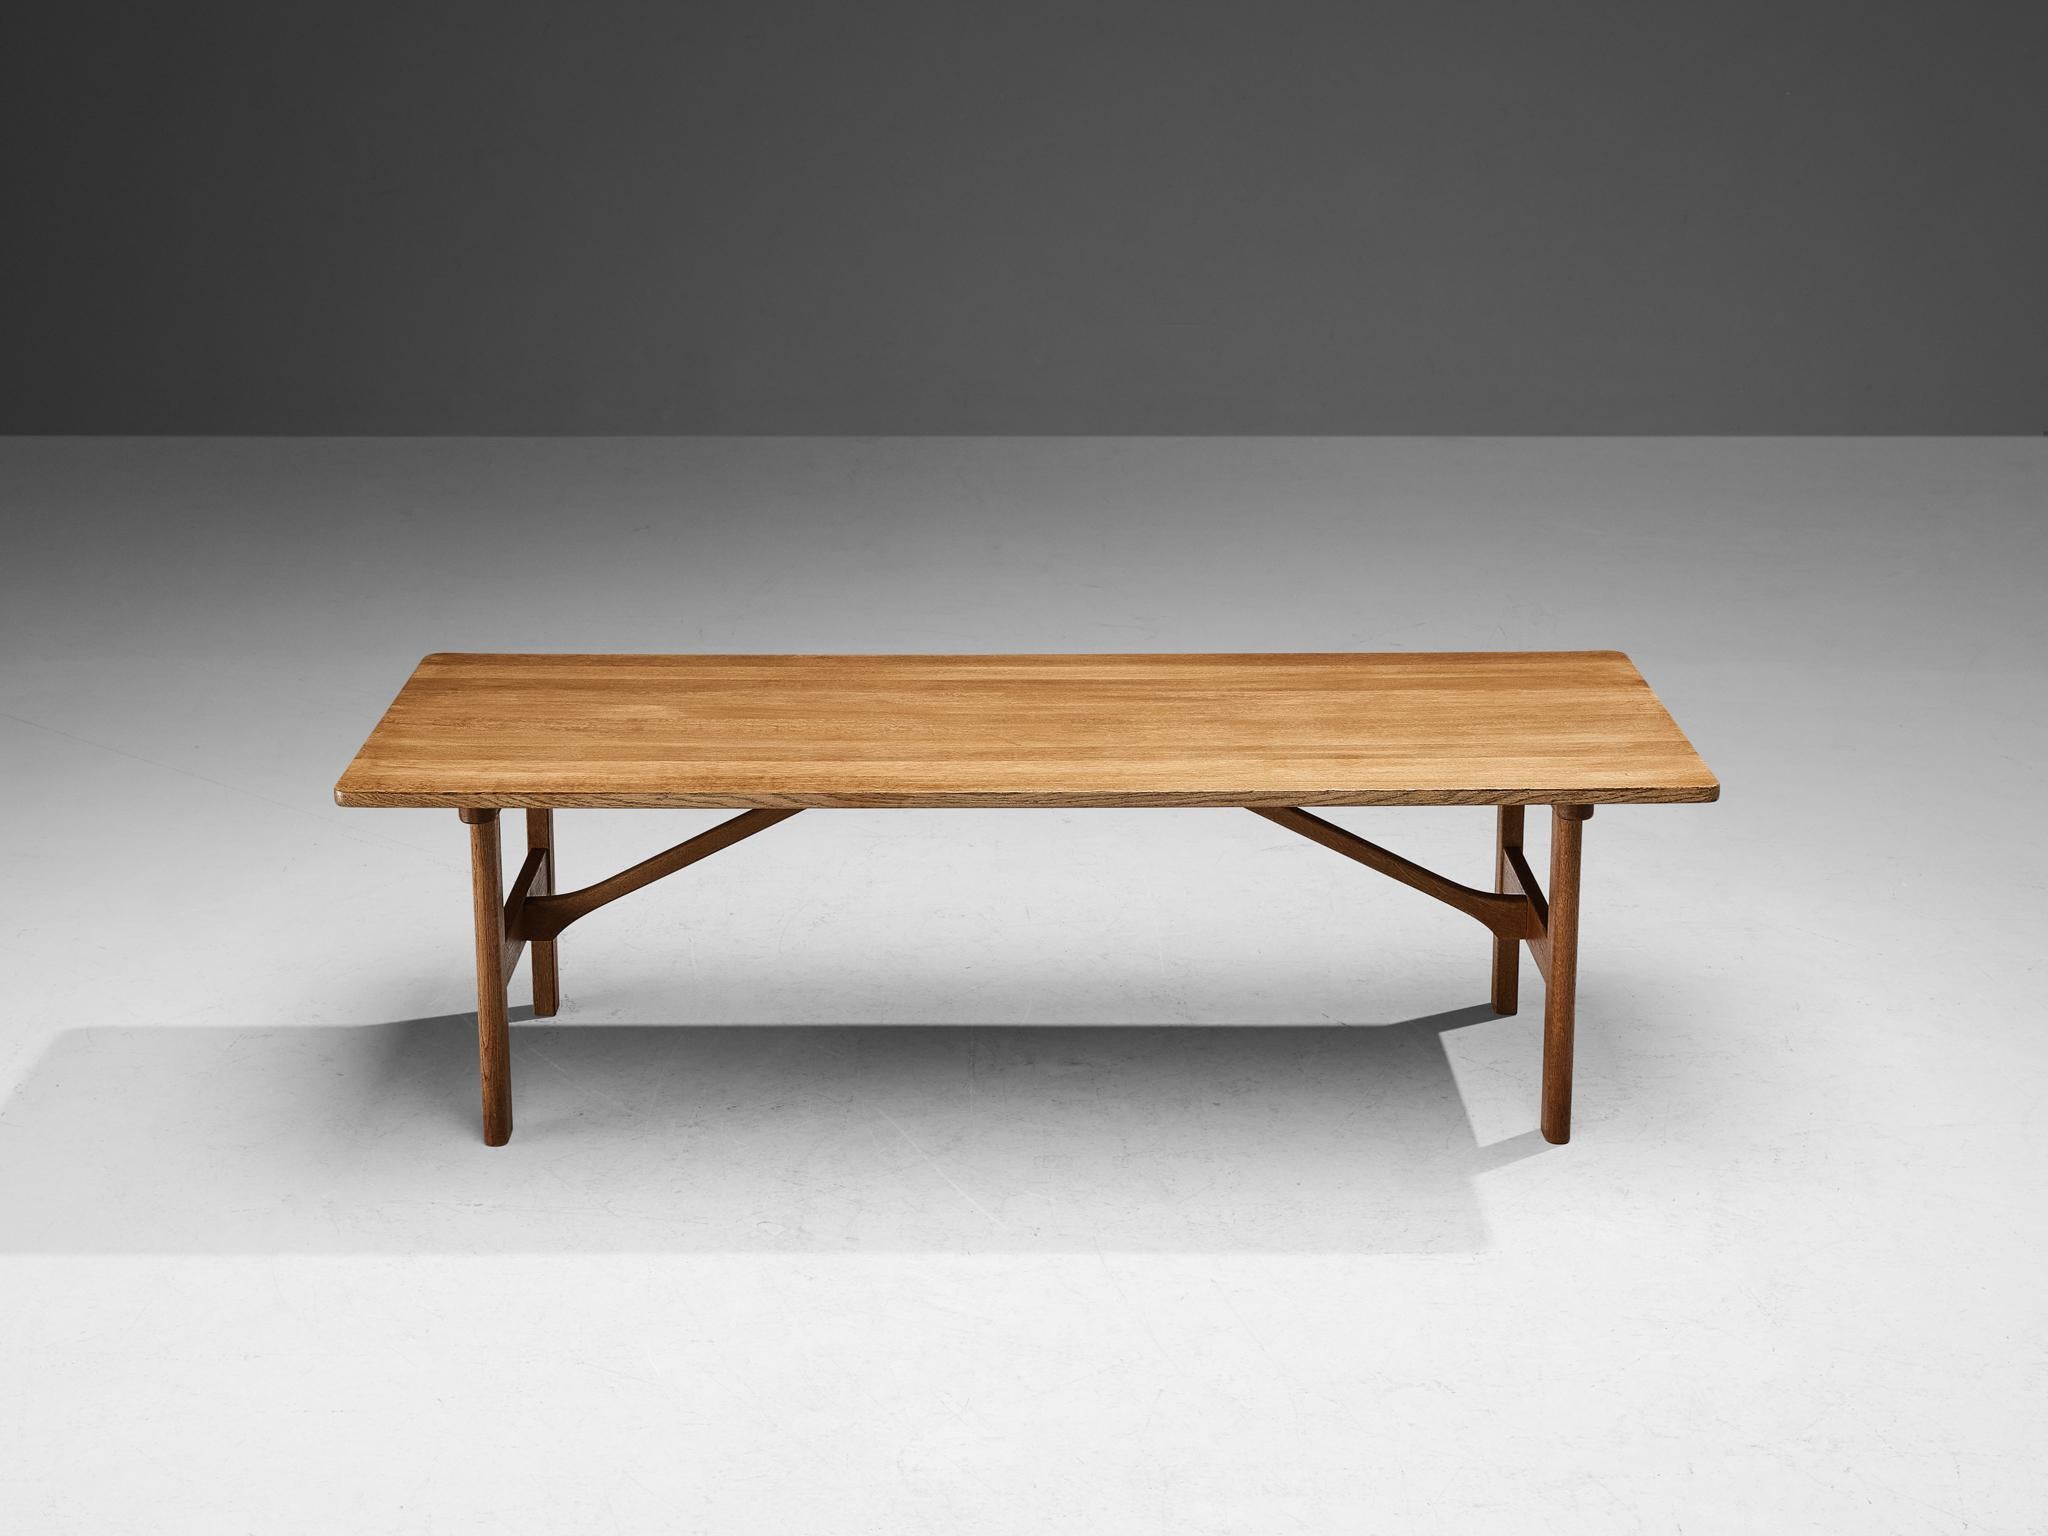 Børge Mogensen for Fredericia Stolefabrik, coffee table model '5268', oak, Denmark, 1967

The design shows a strong and solid construction executed in oak. This is realized by the sharp and clear lines which are visible at the edges of the top and